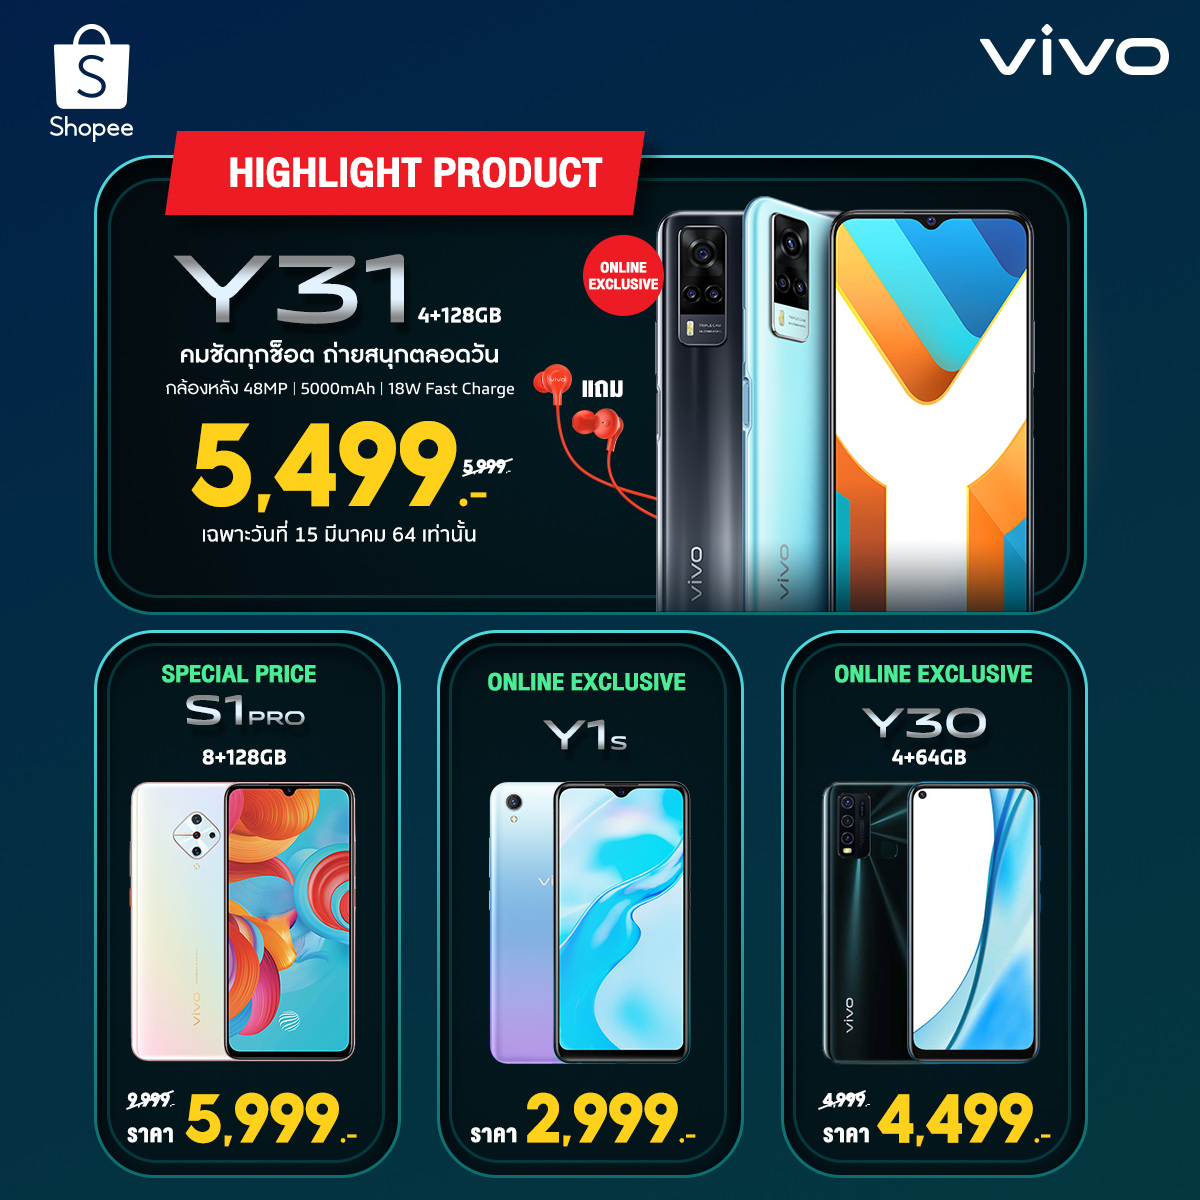 Vivo Brand Of The Day